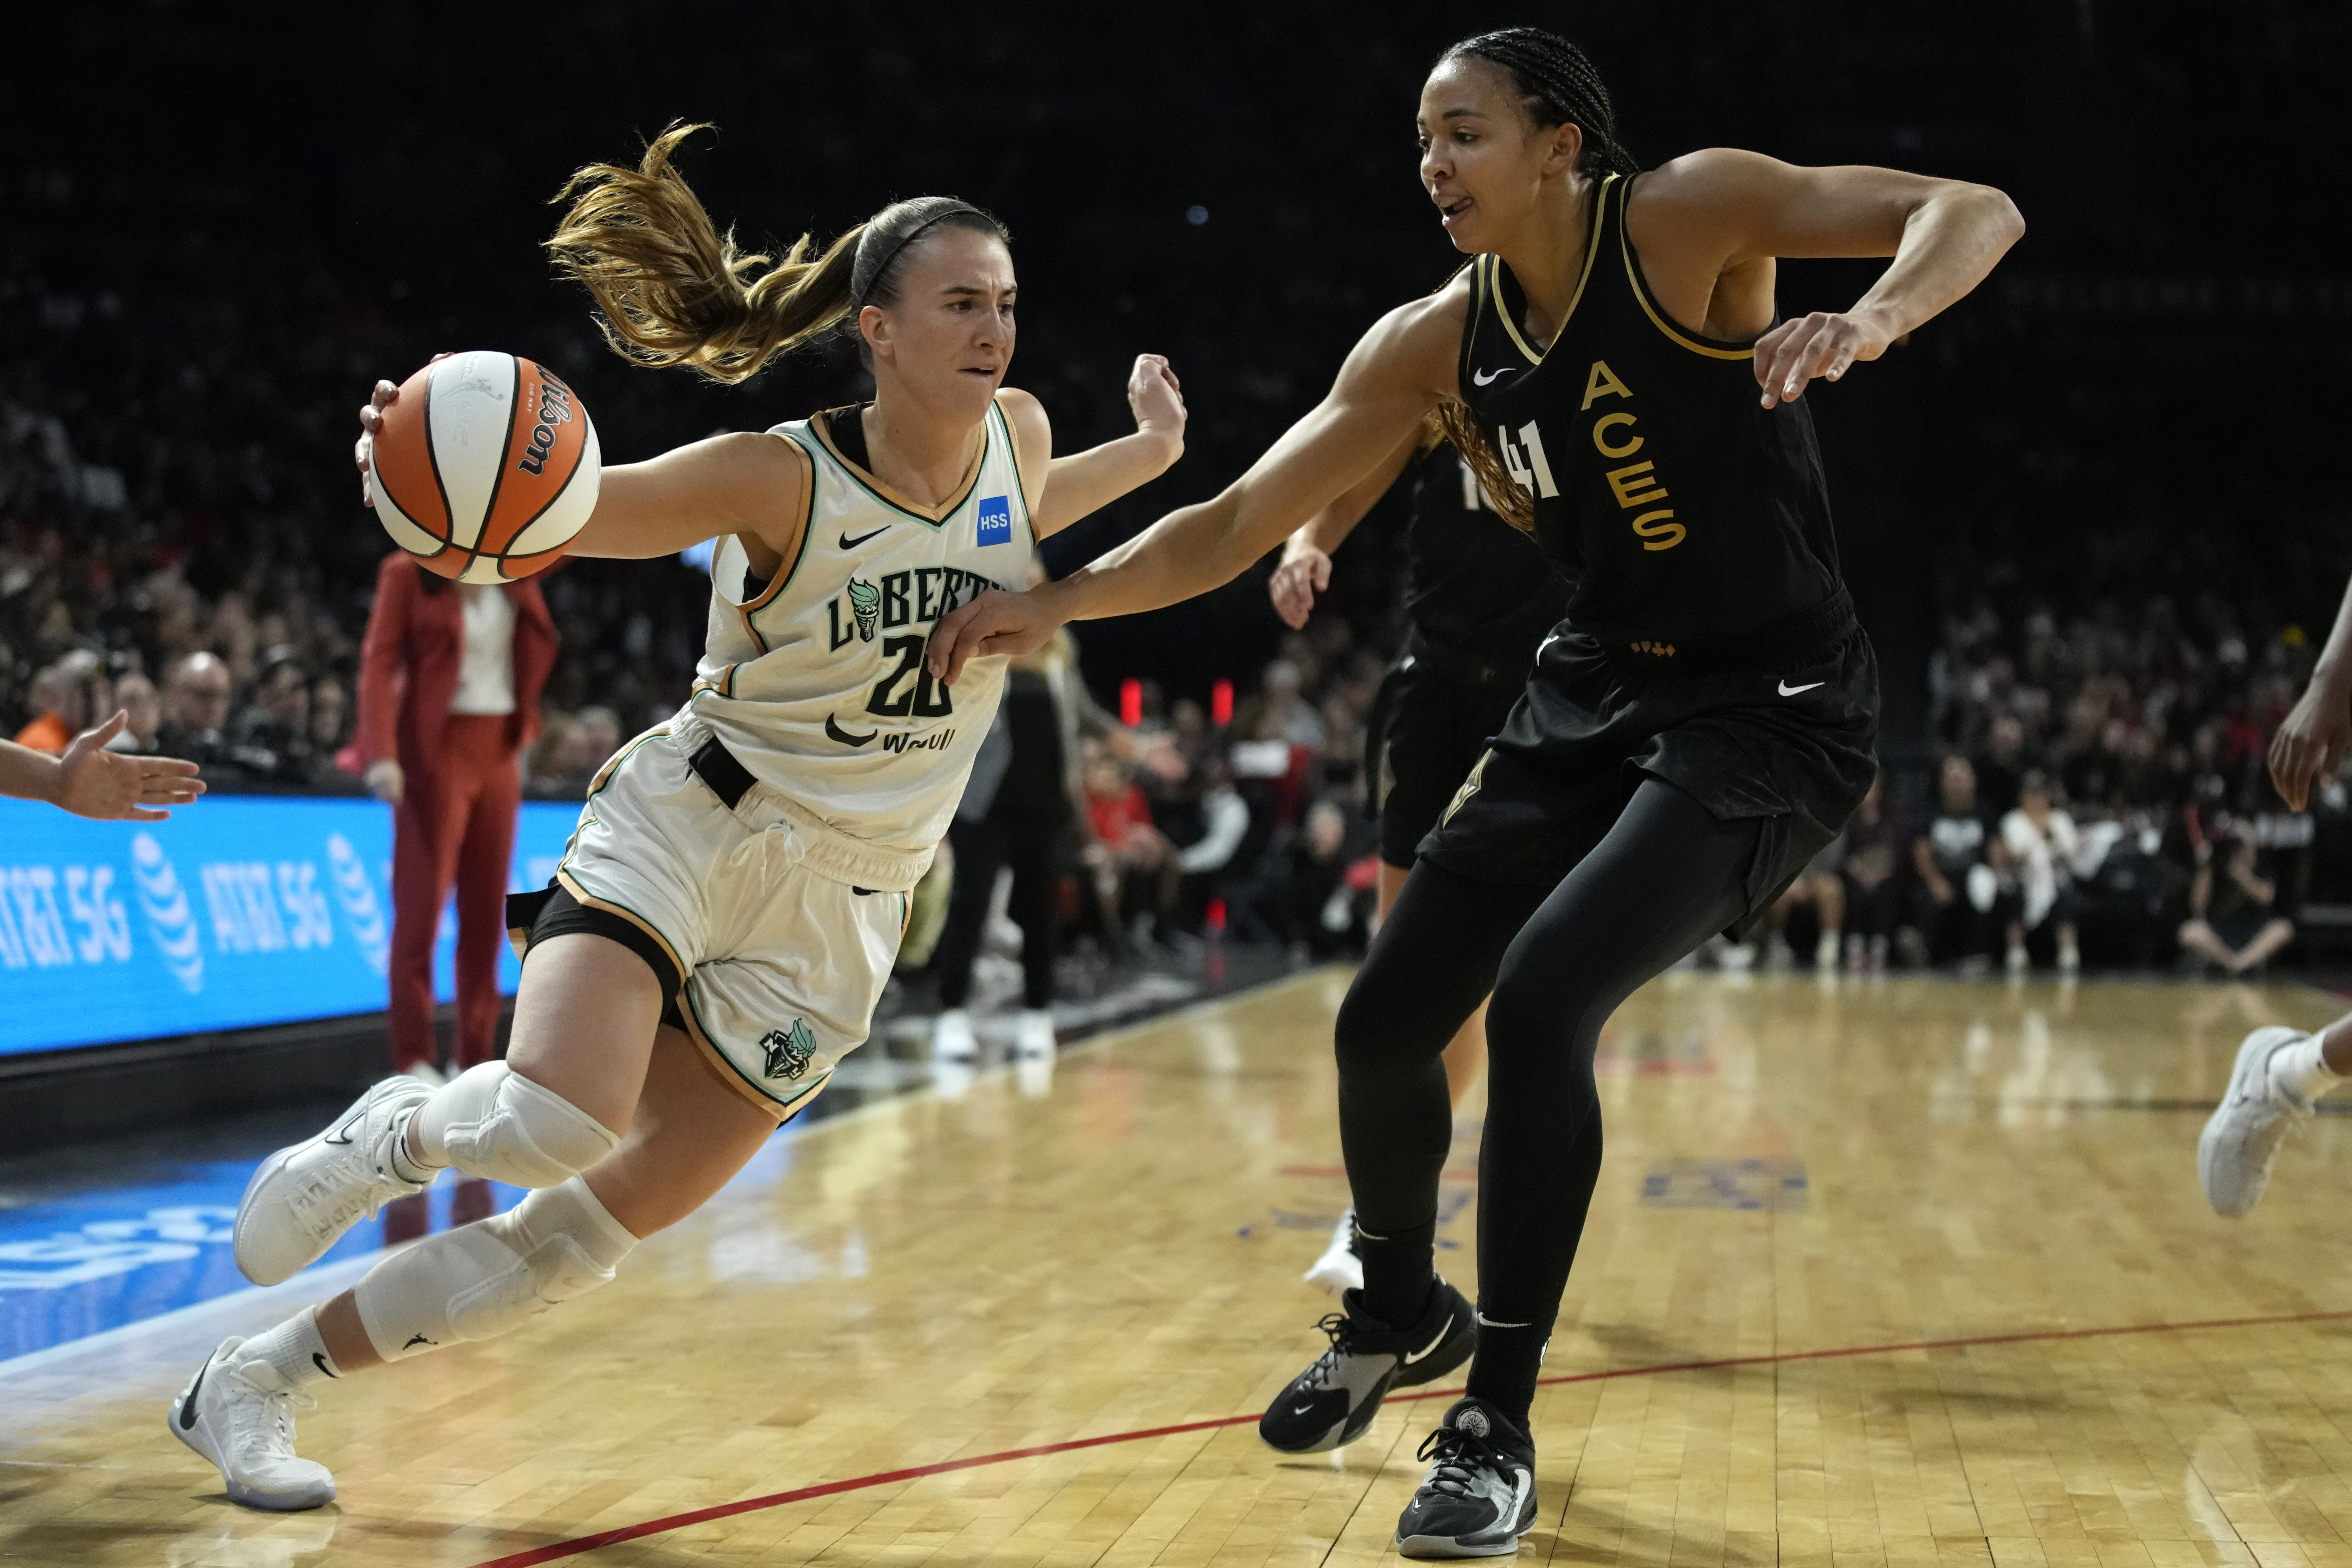 WNBA Finals: Las Vegas Aces first team to repeat since 2001-02 Sparks